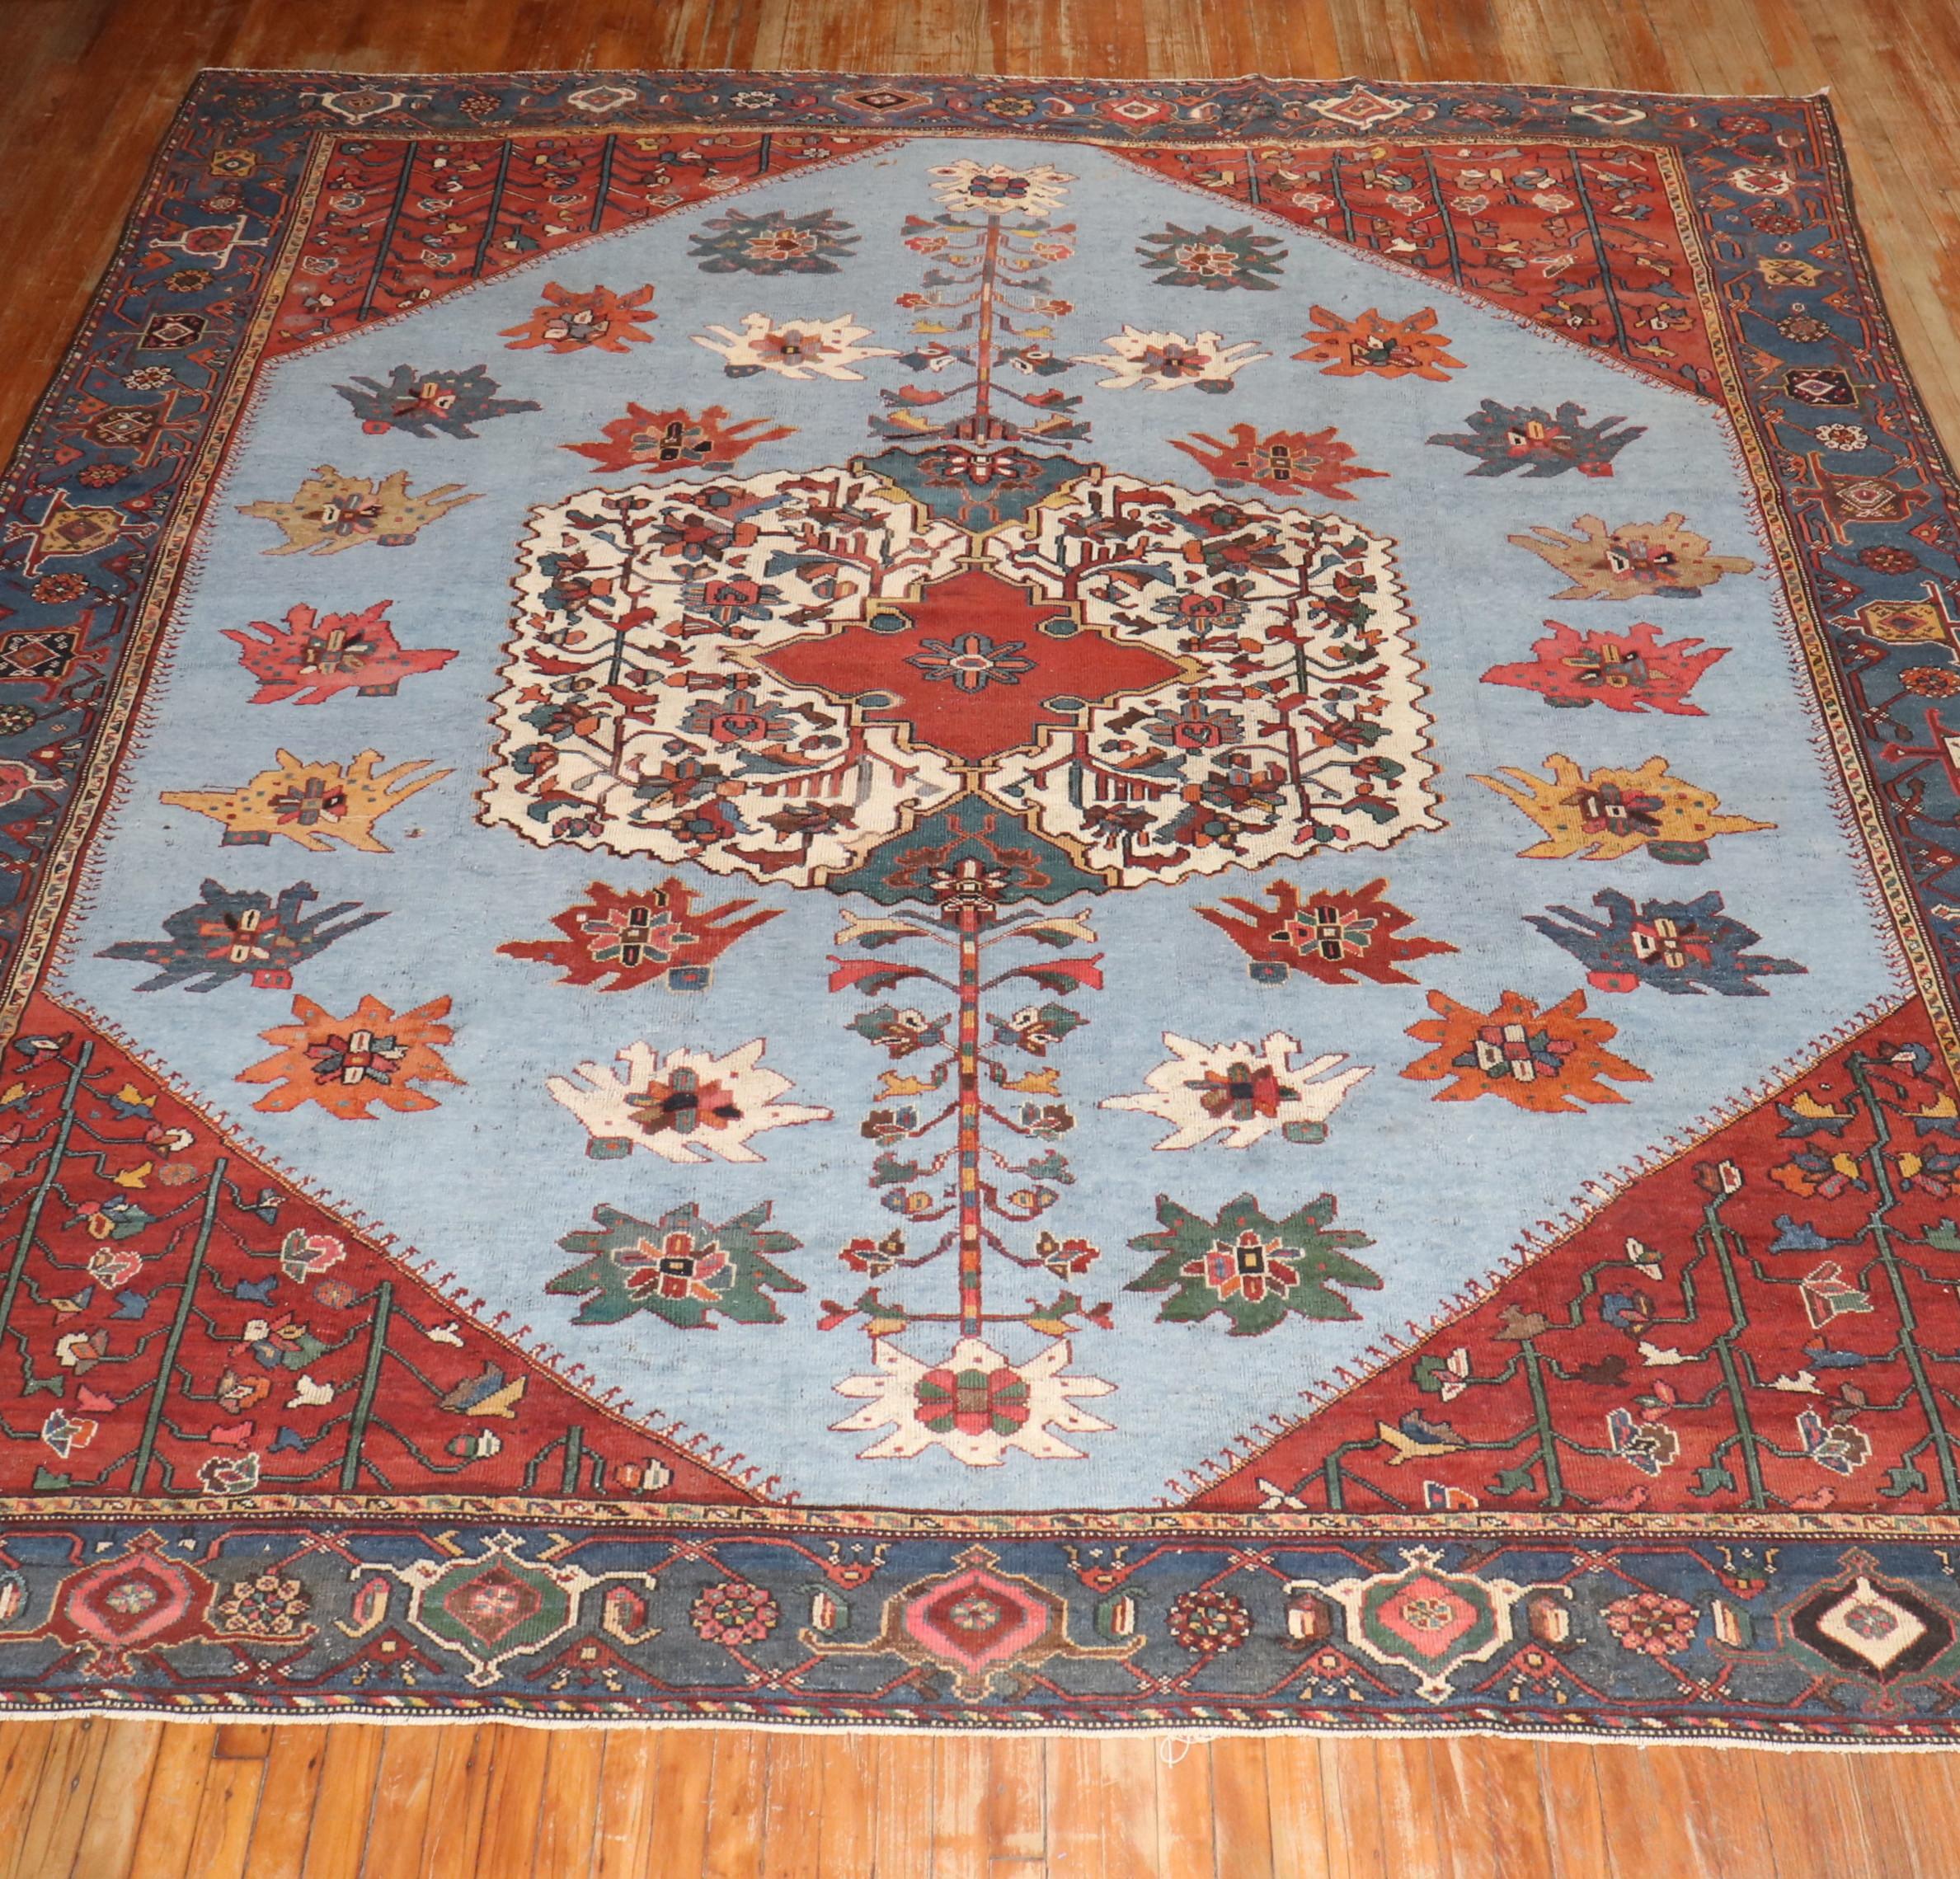 Zabihi Collection Dramatic Room Size Square Antique Persian Bakhtiari Rug In Good Condition For Sale In New York, NY